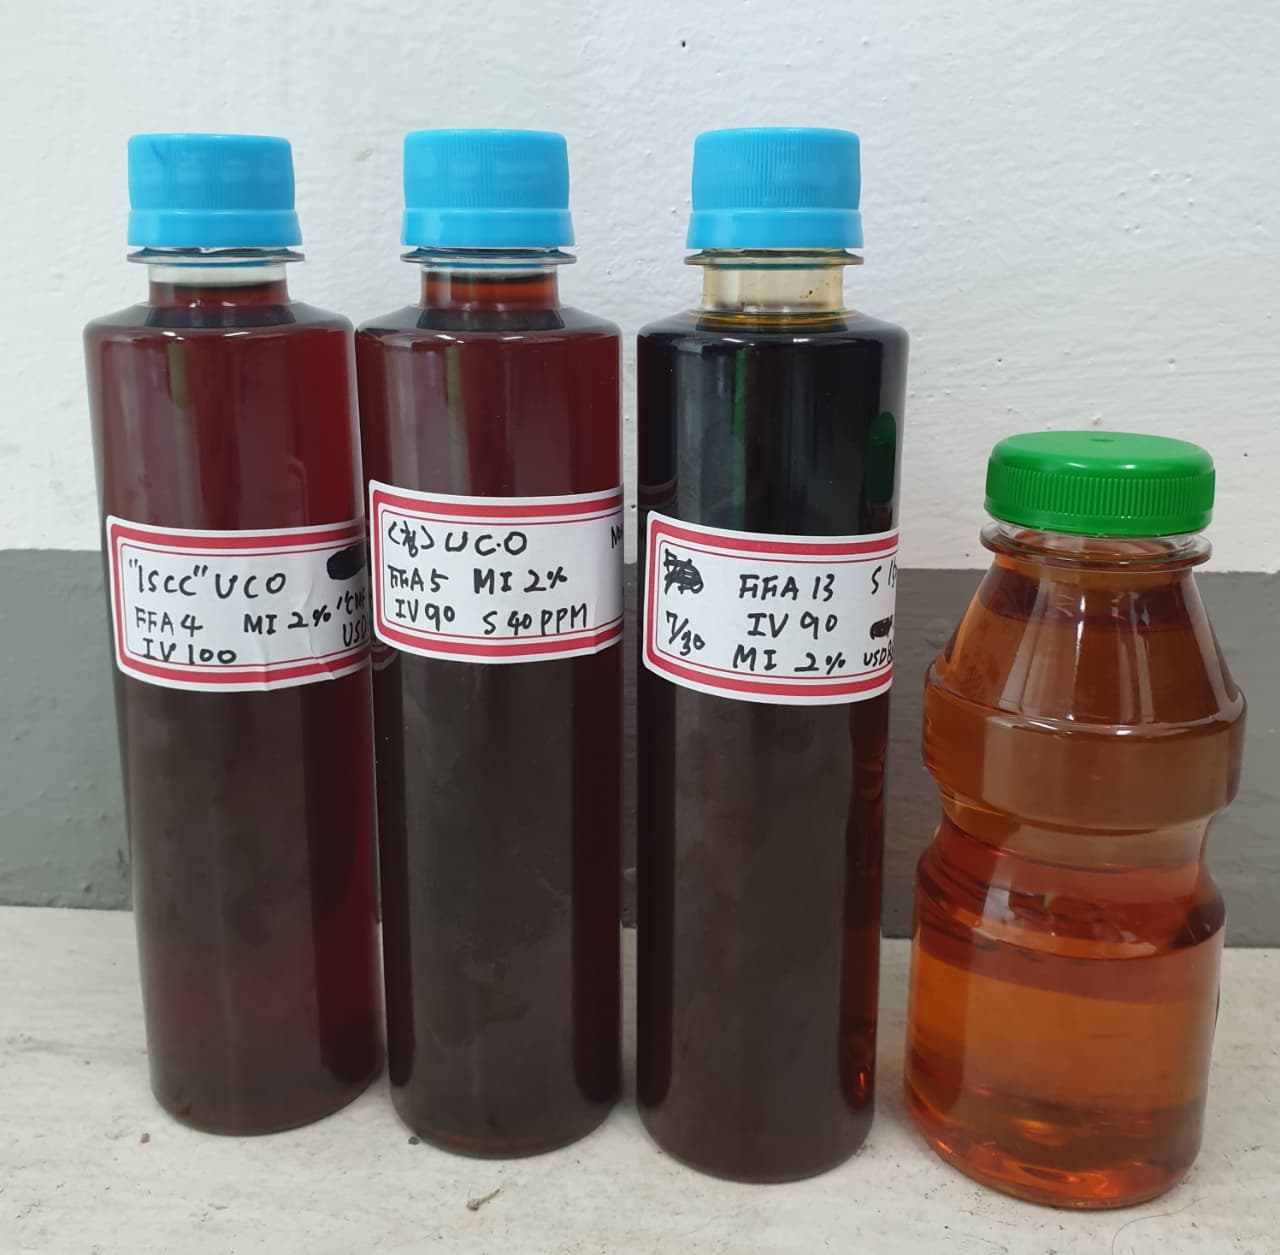 UCO_ BIODIESEL_ BIOFUEL_ CPO_ PALM OIL_ PAO_ USED COOKING OIL_ FATTY MATTER_ OIL_ SOYBEEN OIL_ FAME